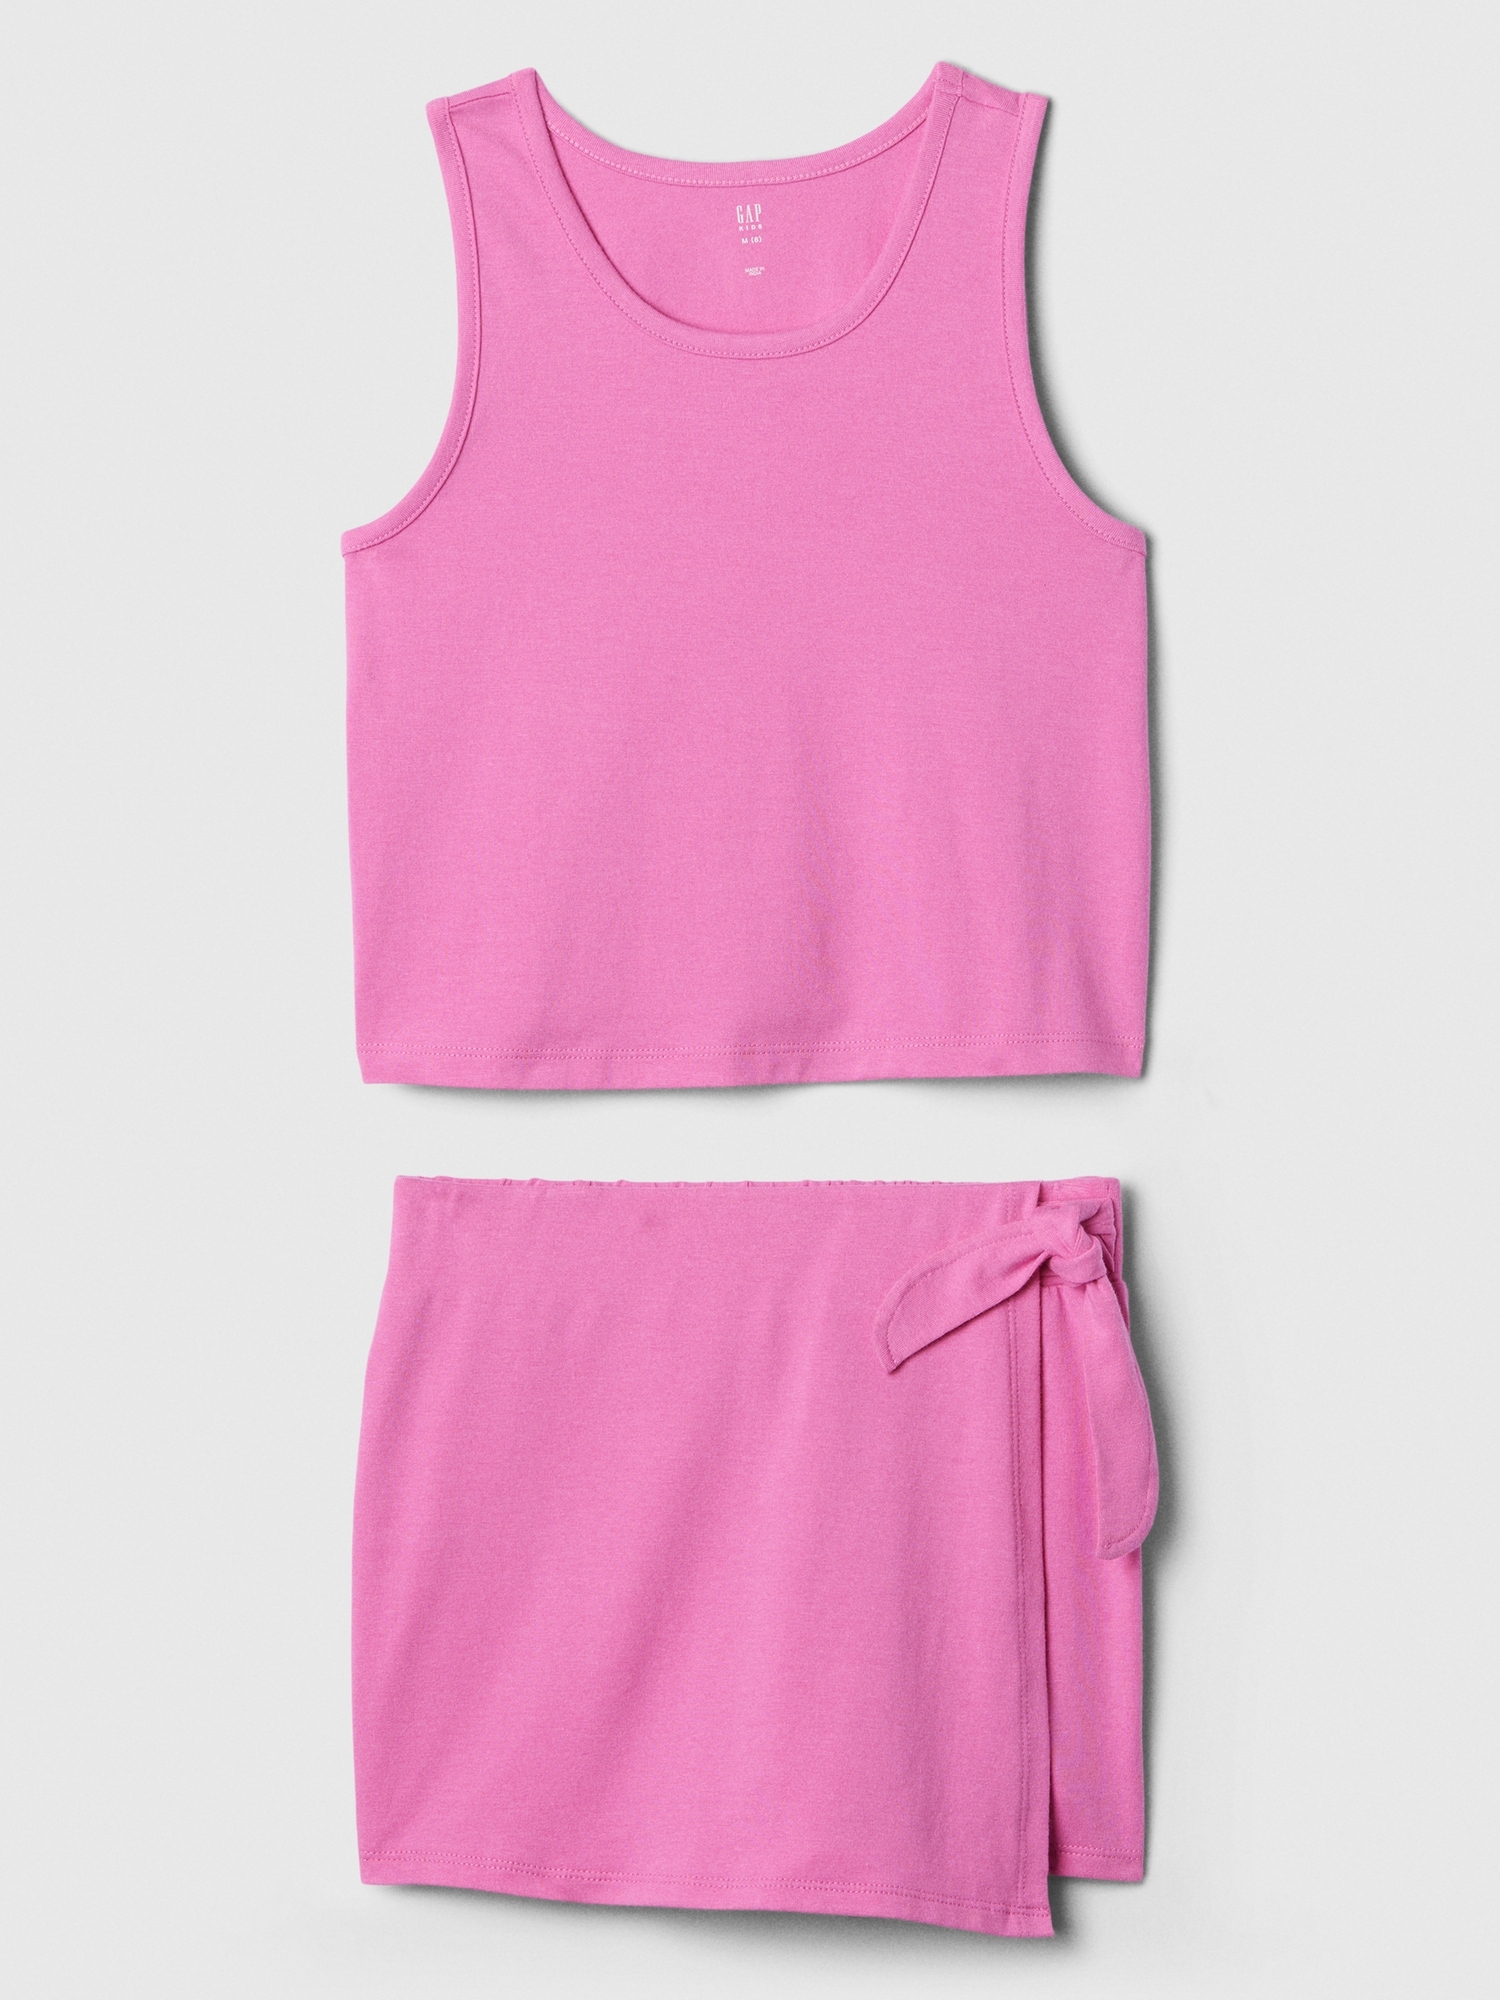 Kids Skort Two-Piece Outfit Set